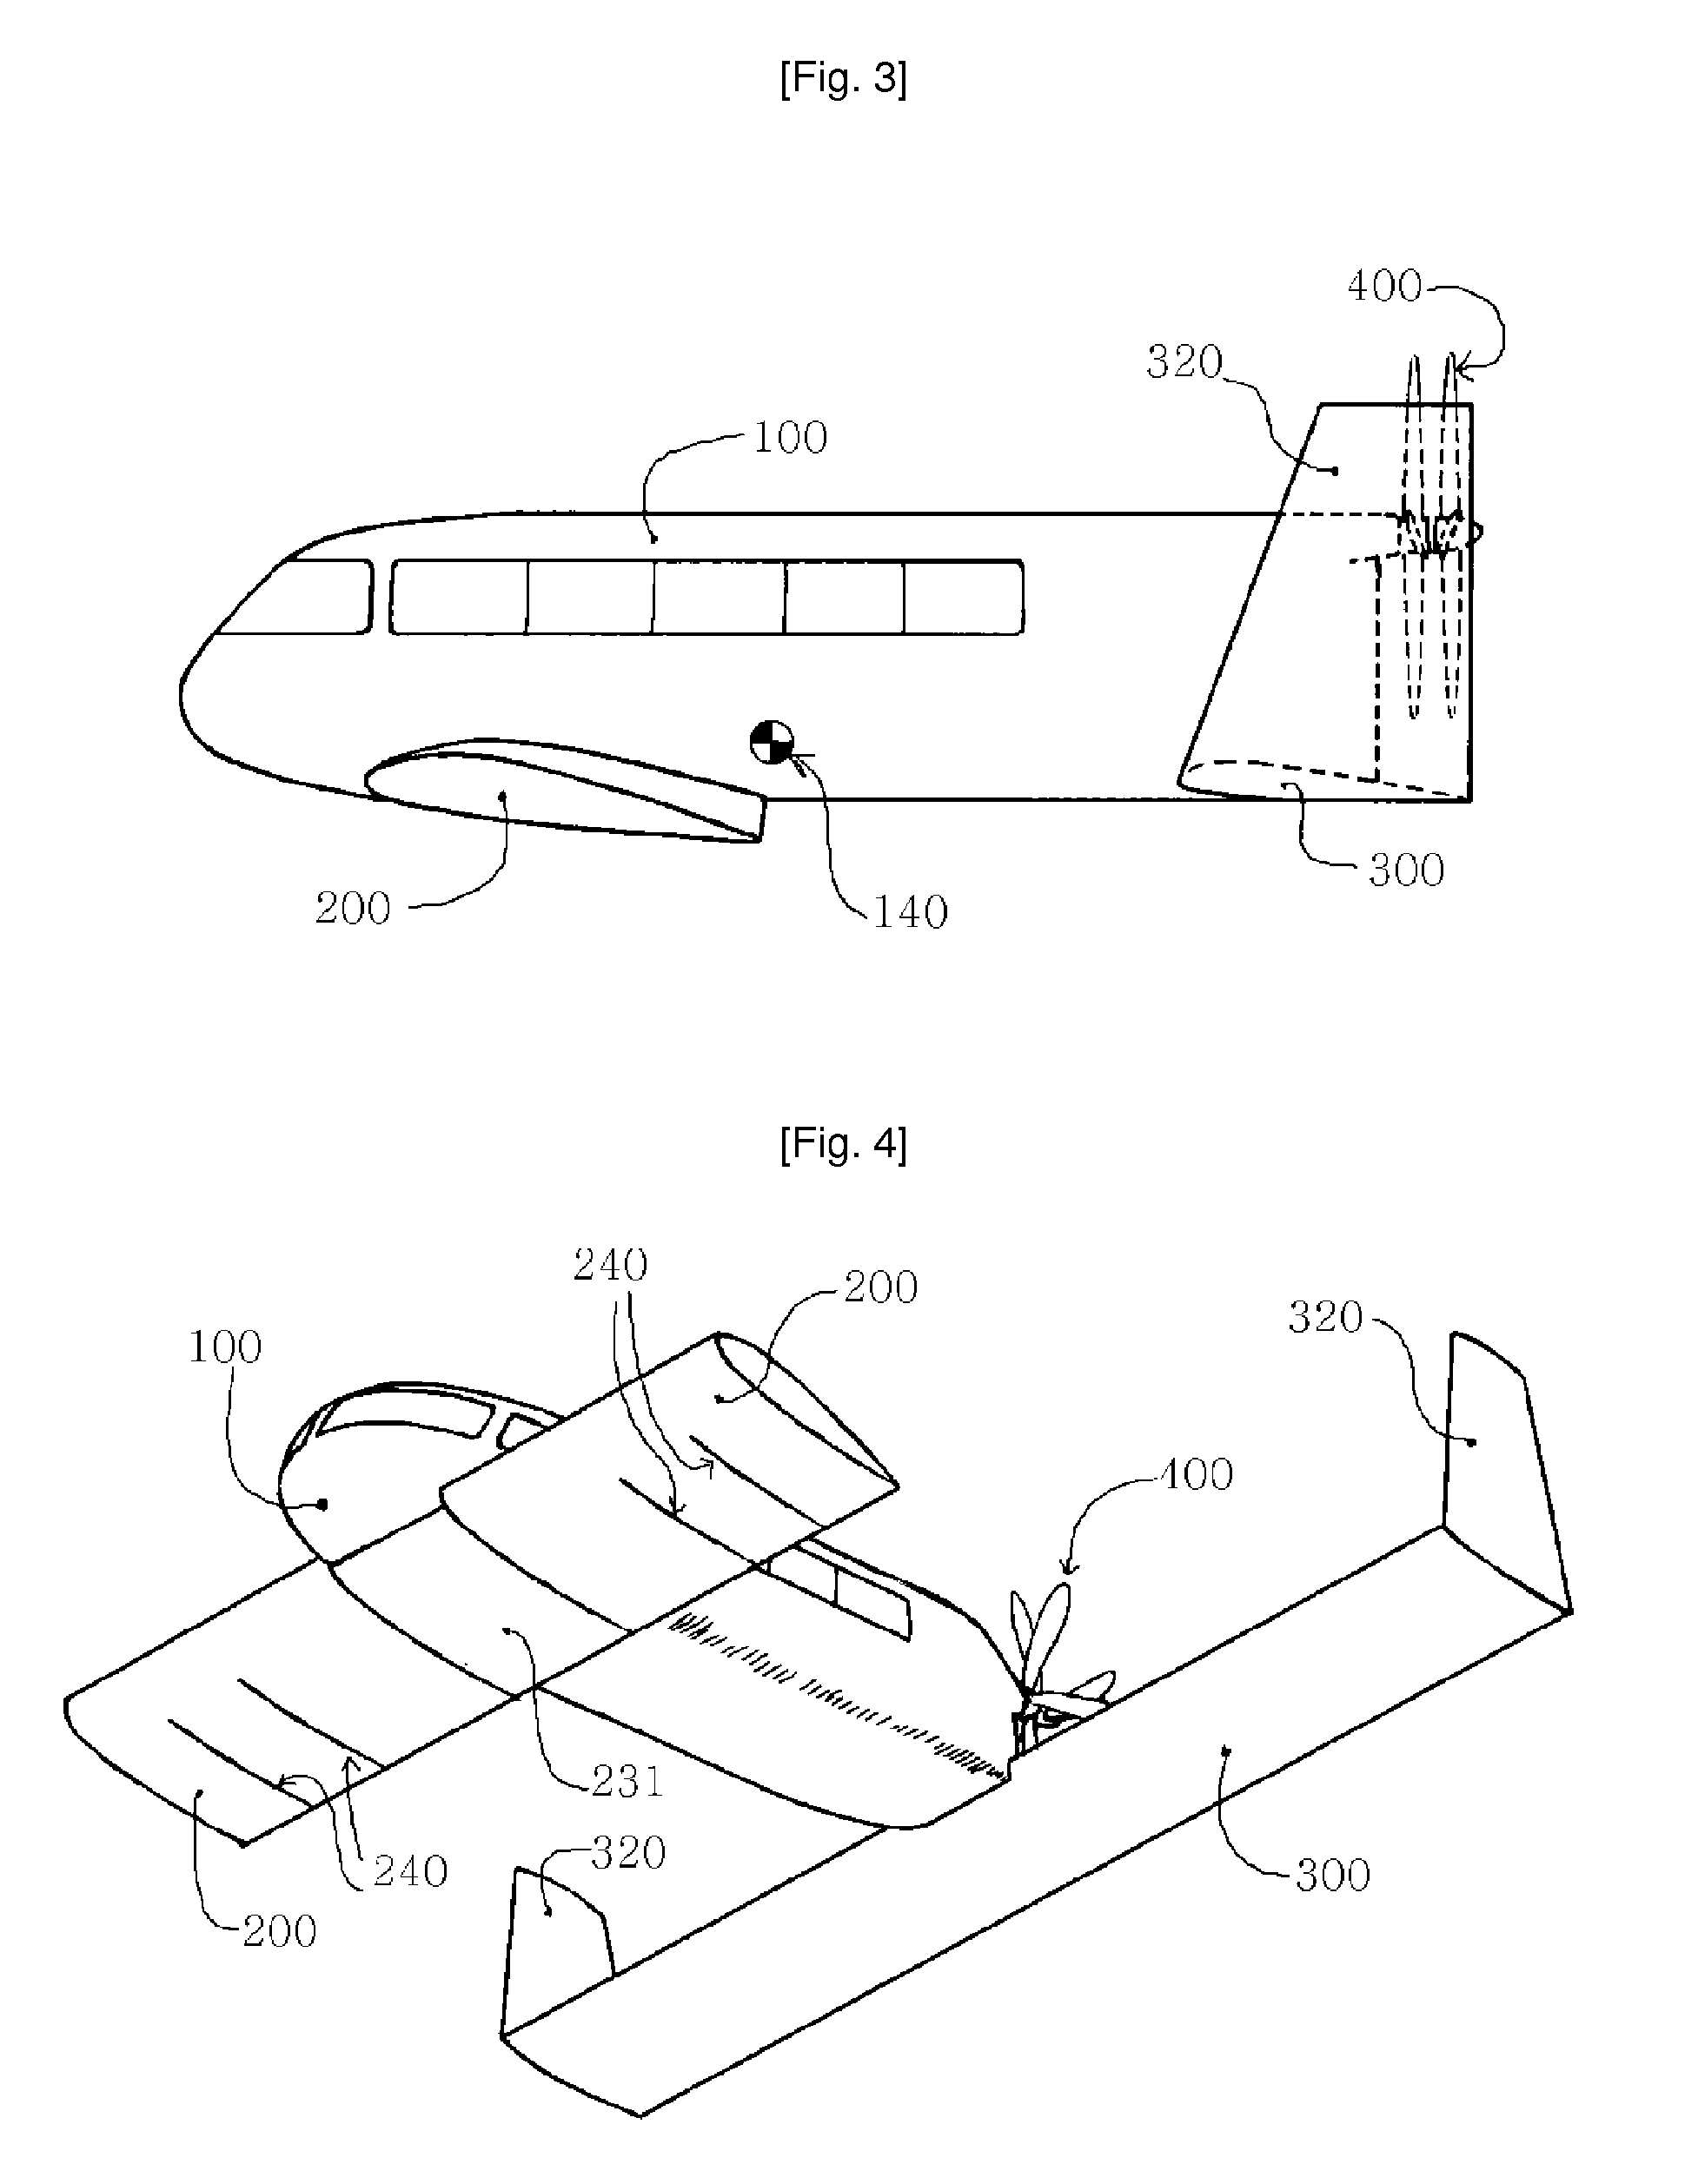 Tandem/canard wig boat with suspension systems